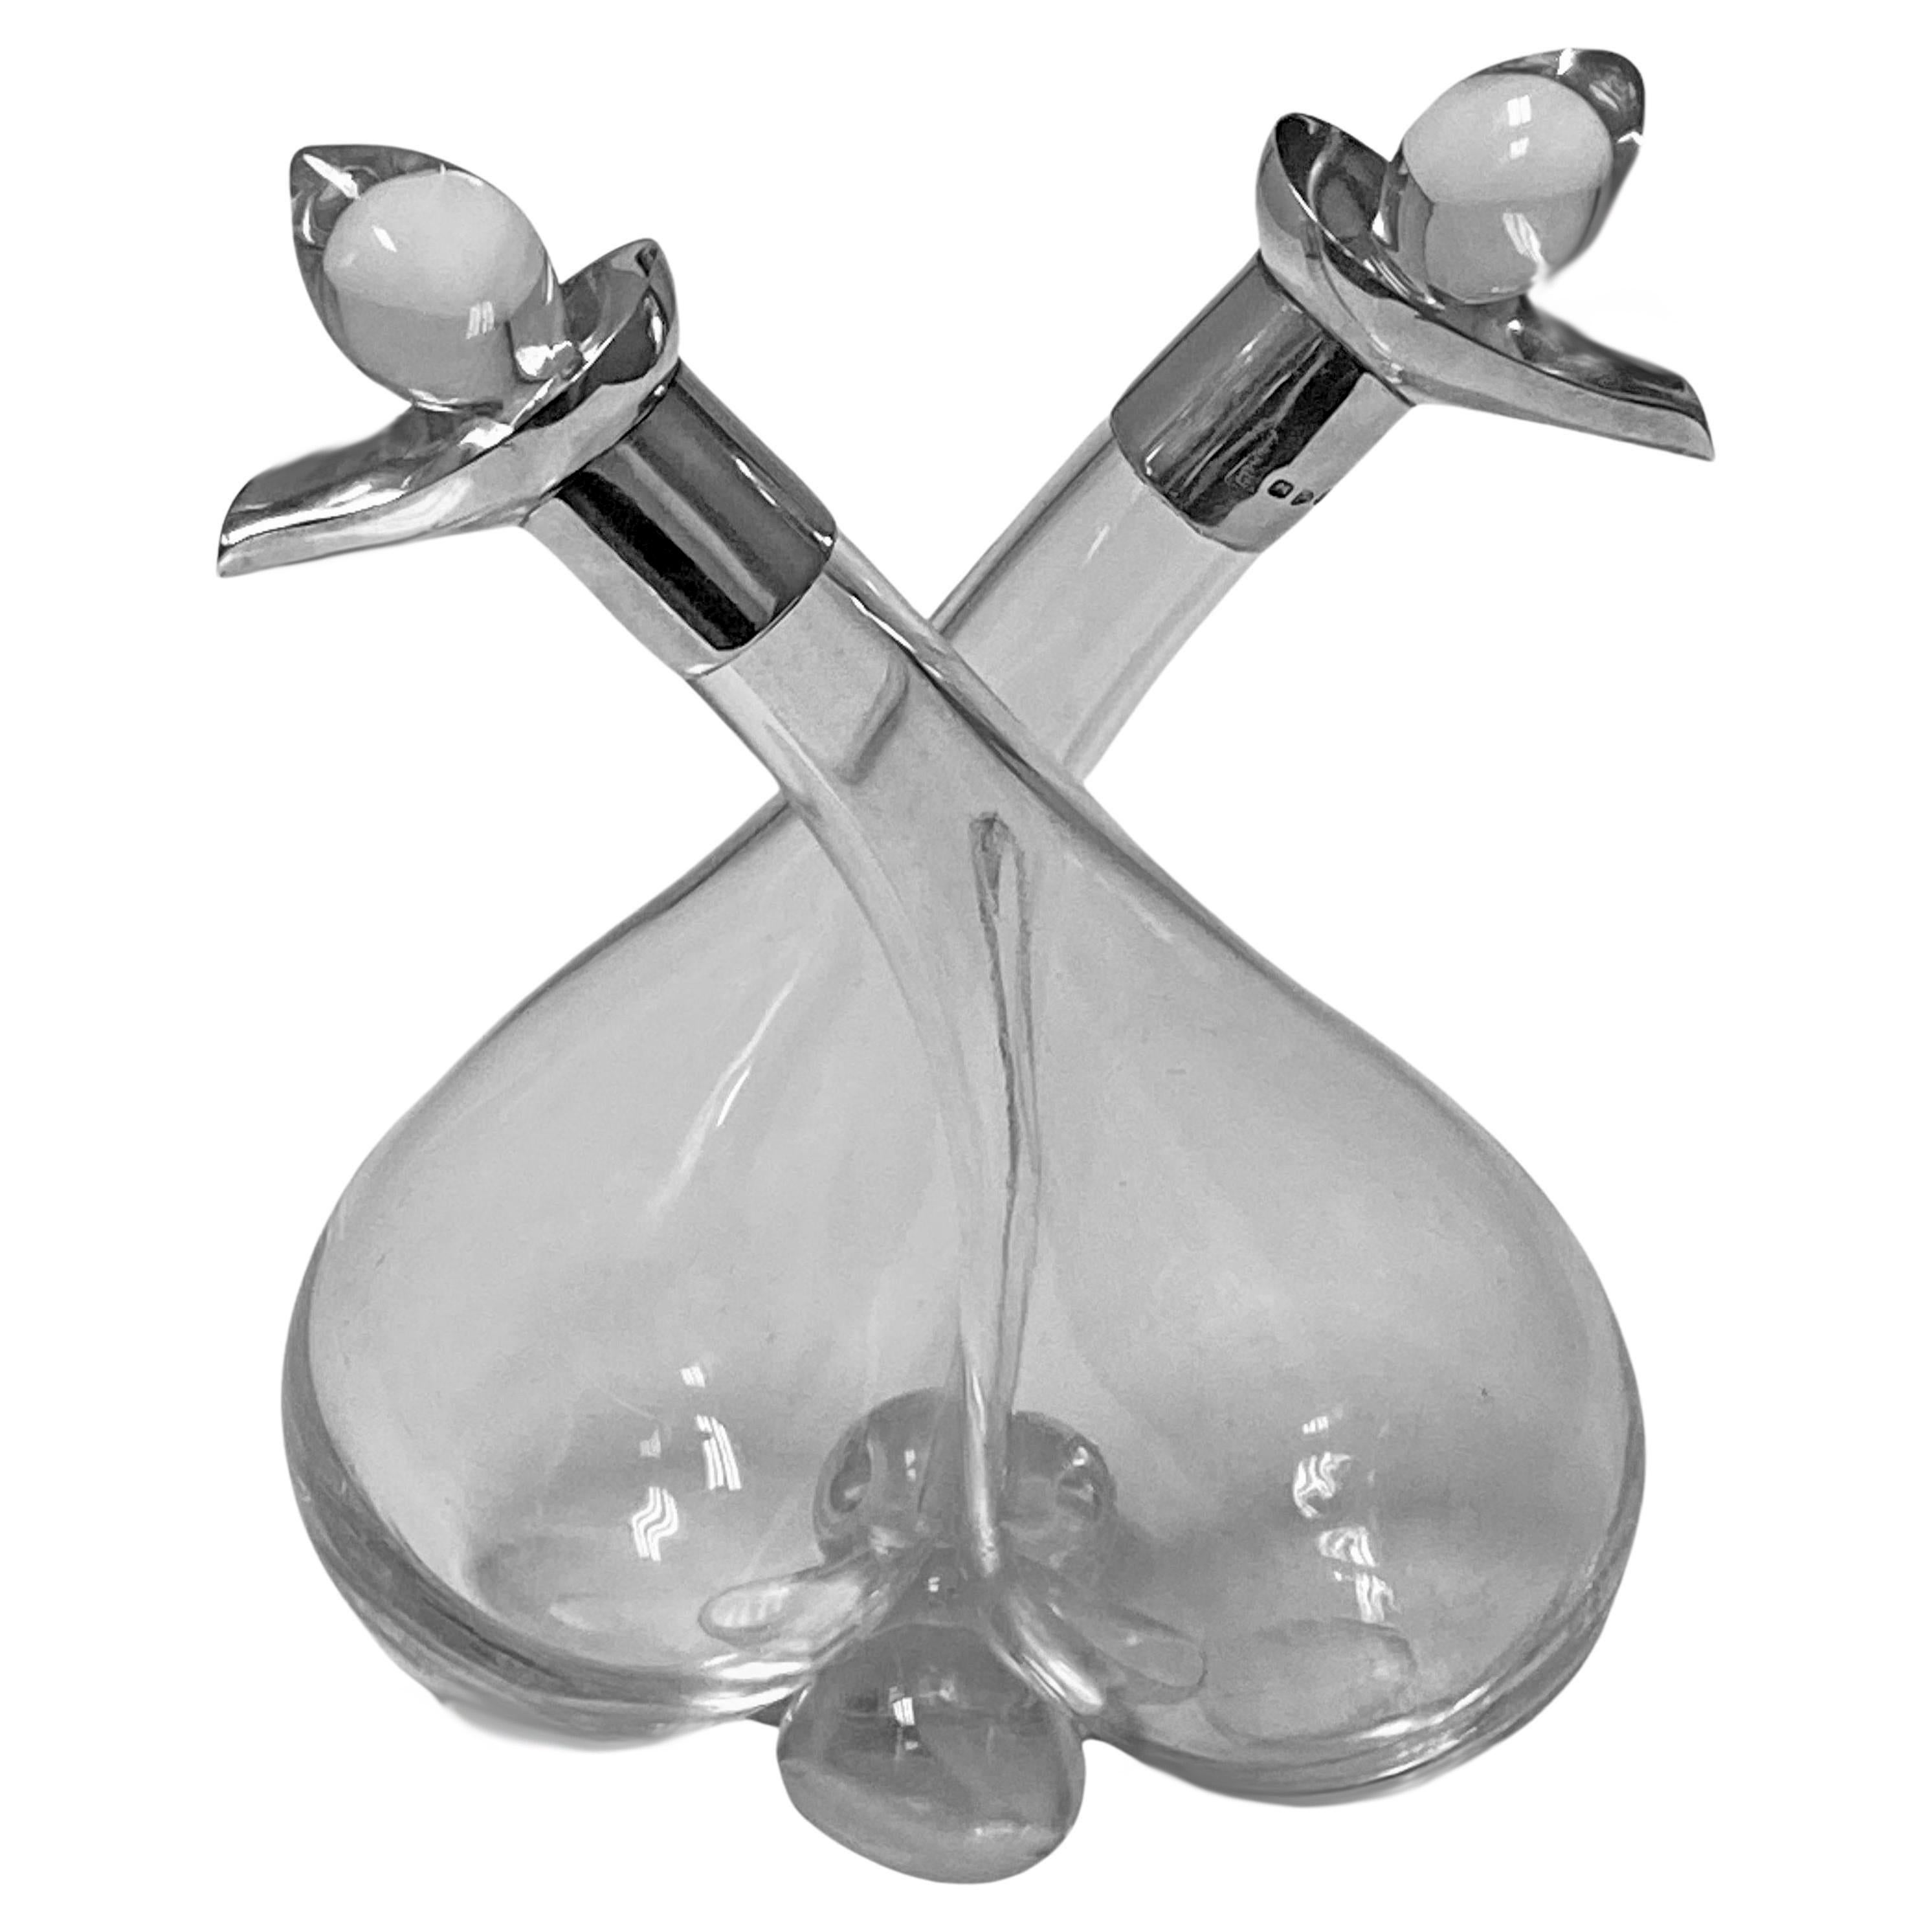 Antique silver and glass oil and vinegar conjoined chester 1898 King & Sons. Conjoined clear hand blown tapered bulbous glass containers with sterling silver collar mounts, clear hallmarks, and original stoppers. Good condition. Measures